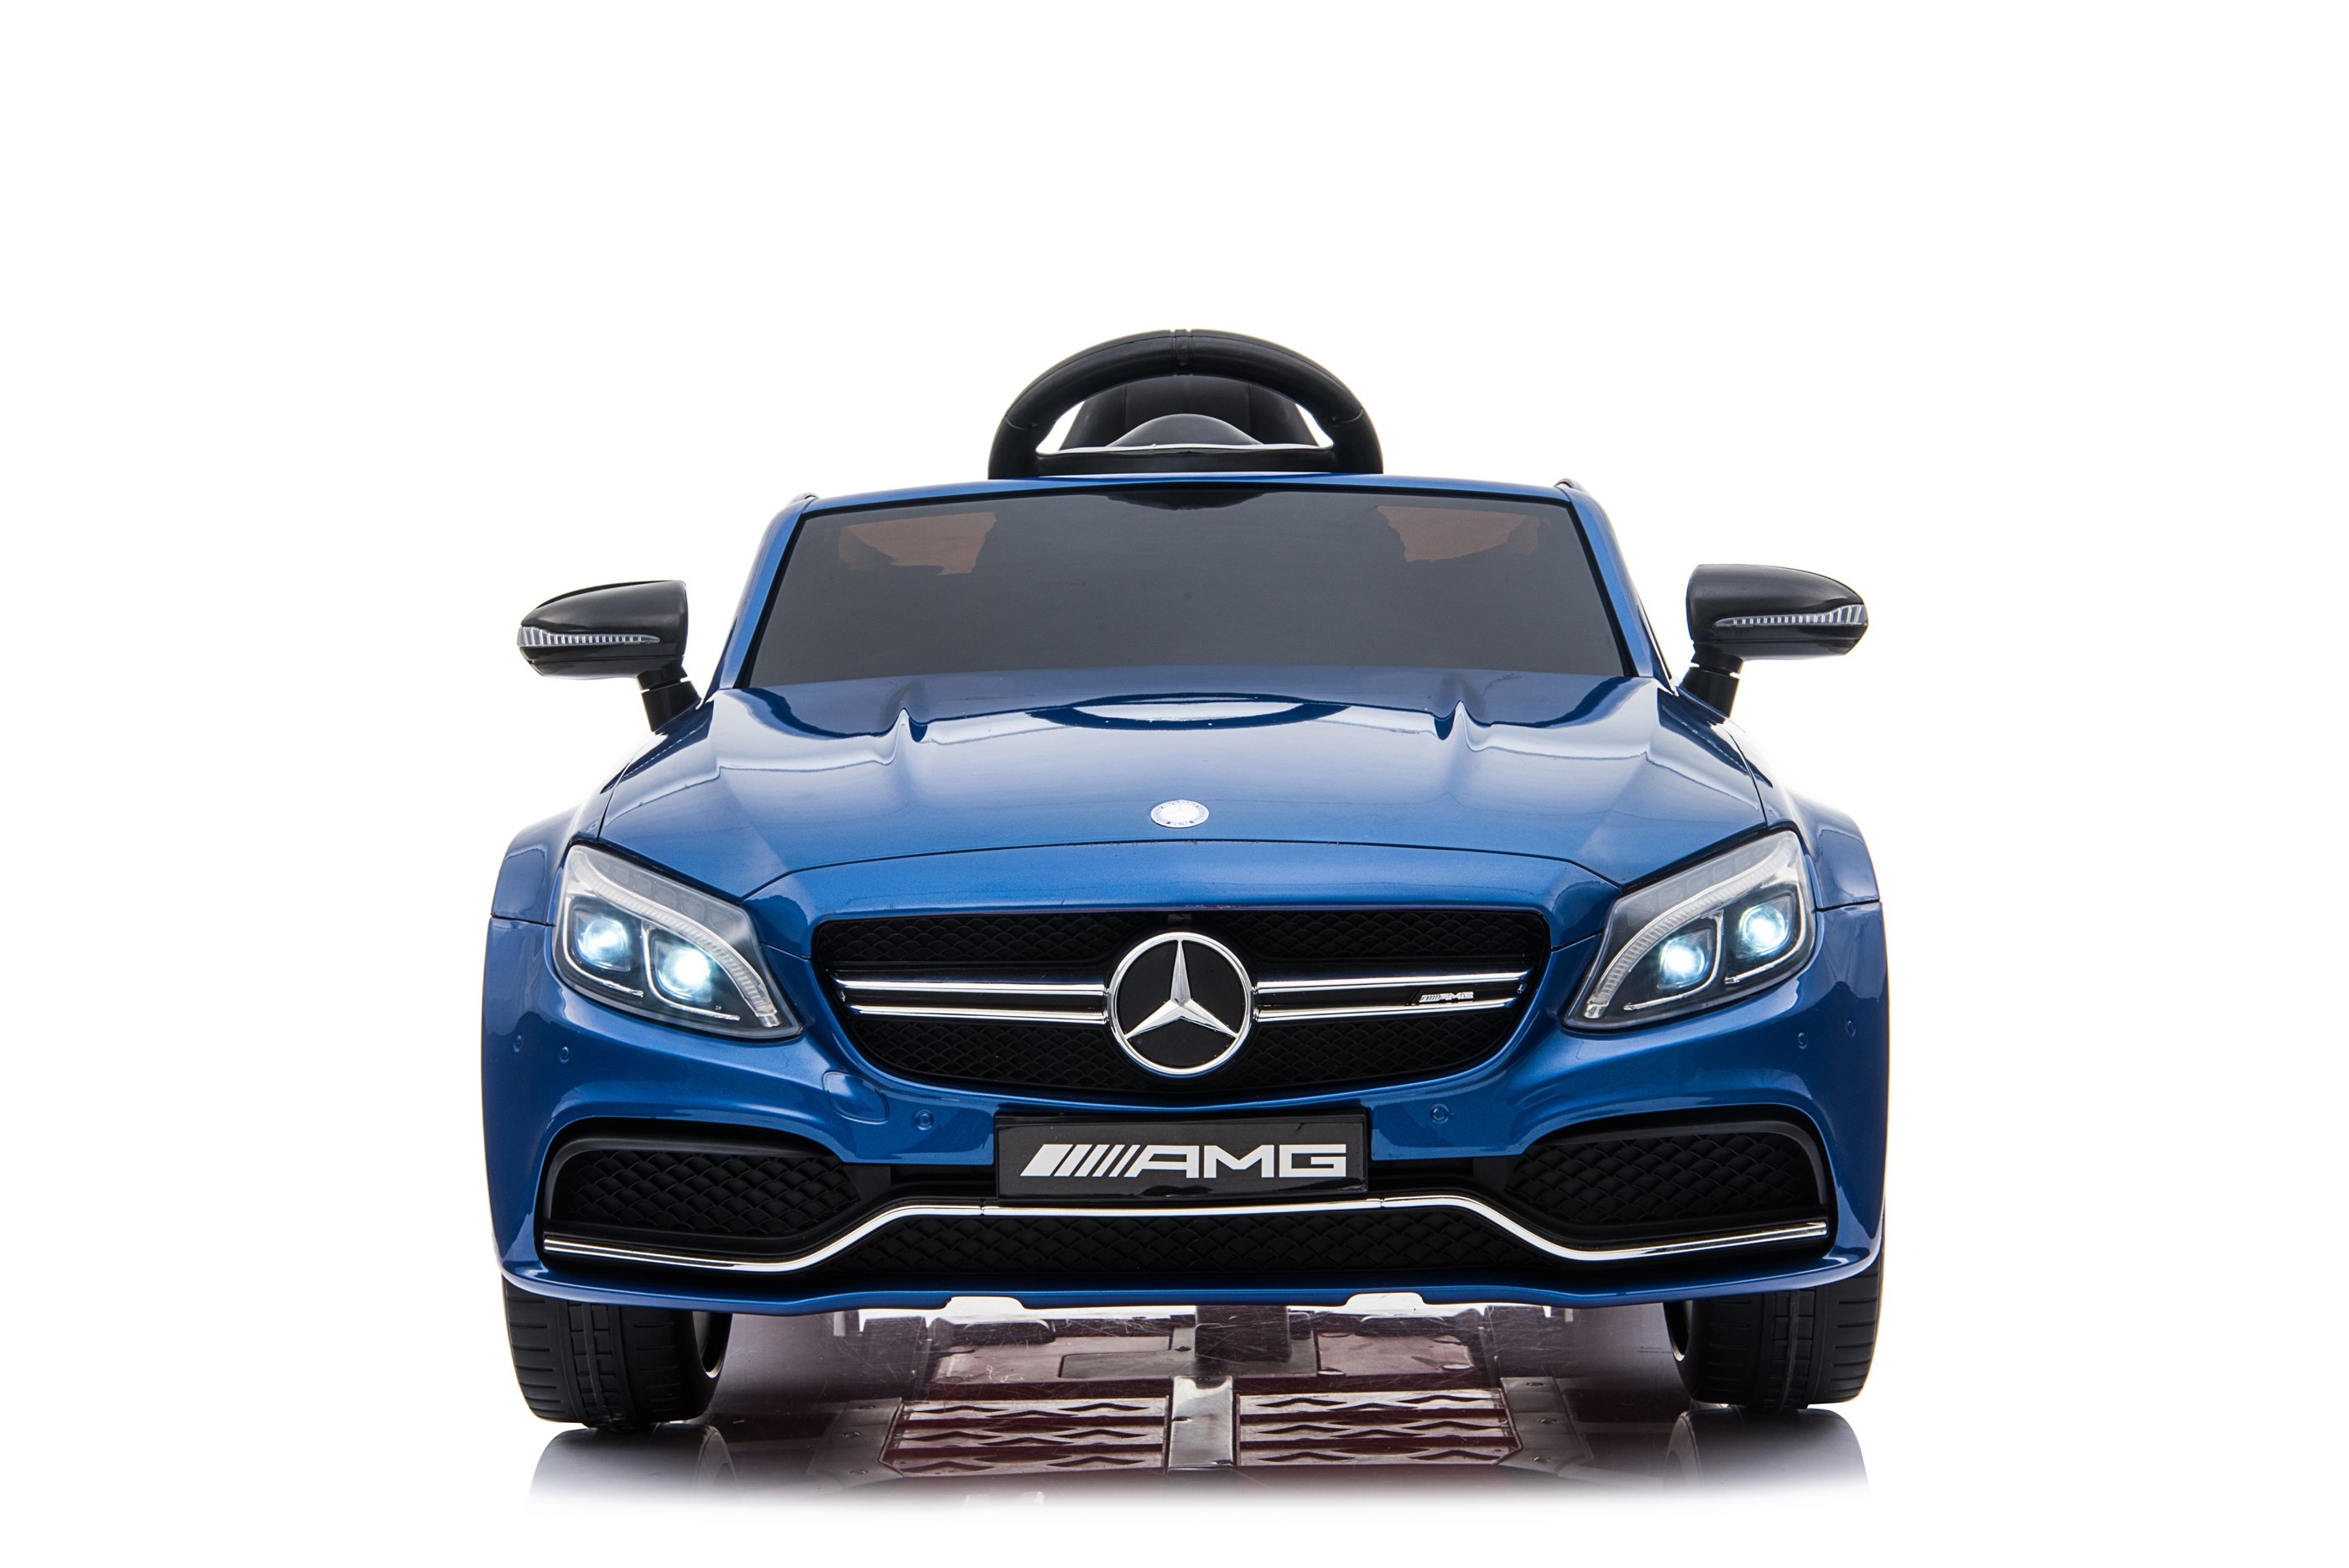 Licensed Mercedes C63 AMG – 12V Electric Ride On Car + Leather Seat – Metallic Blue